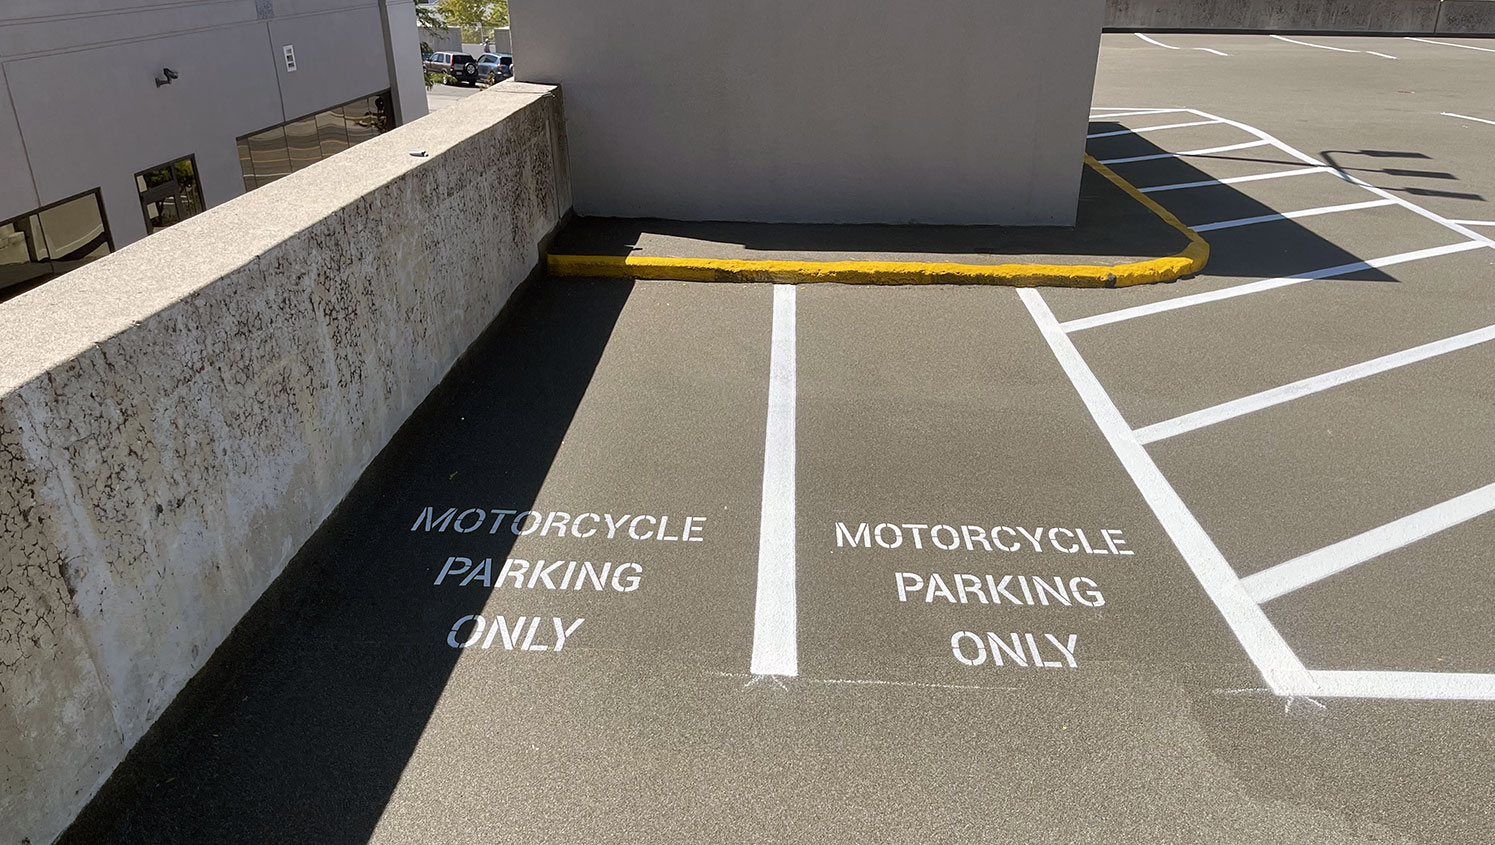 newly striped motorcycle parking